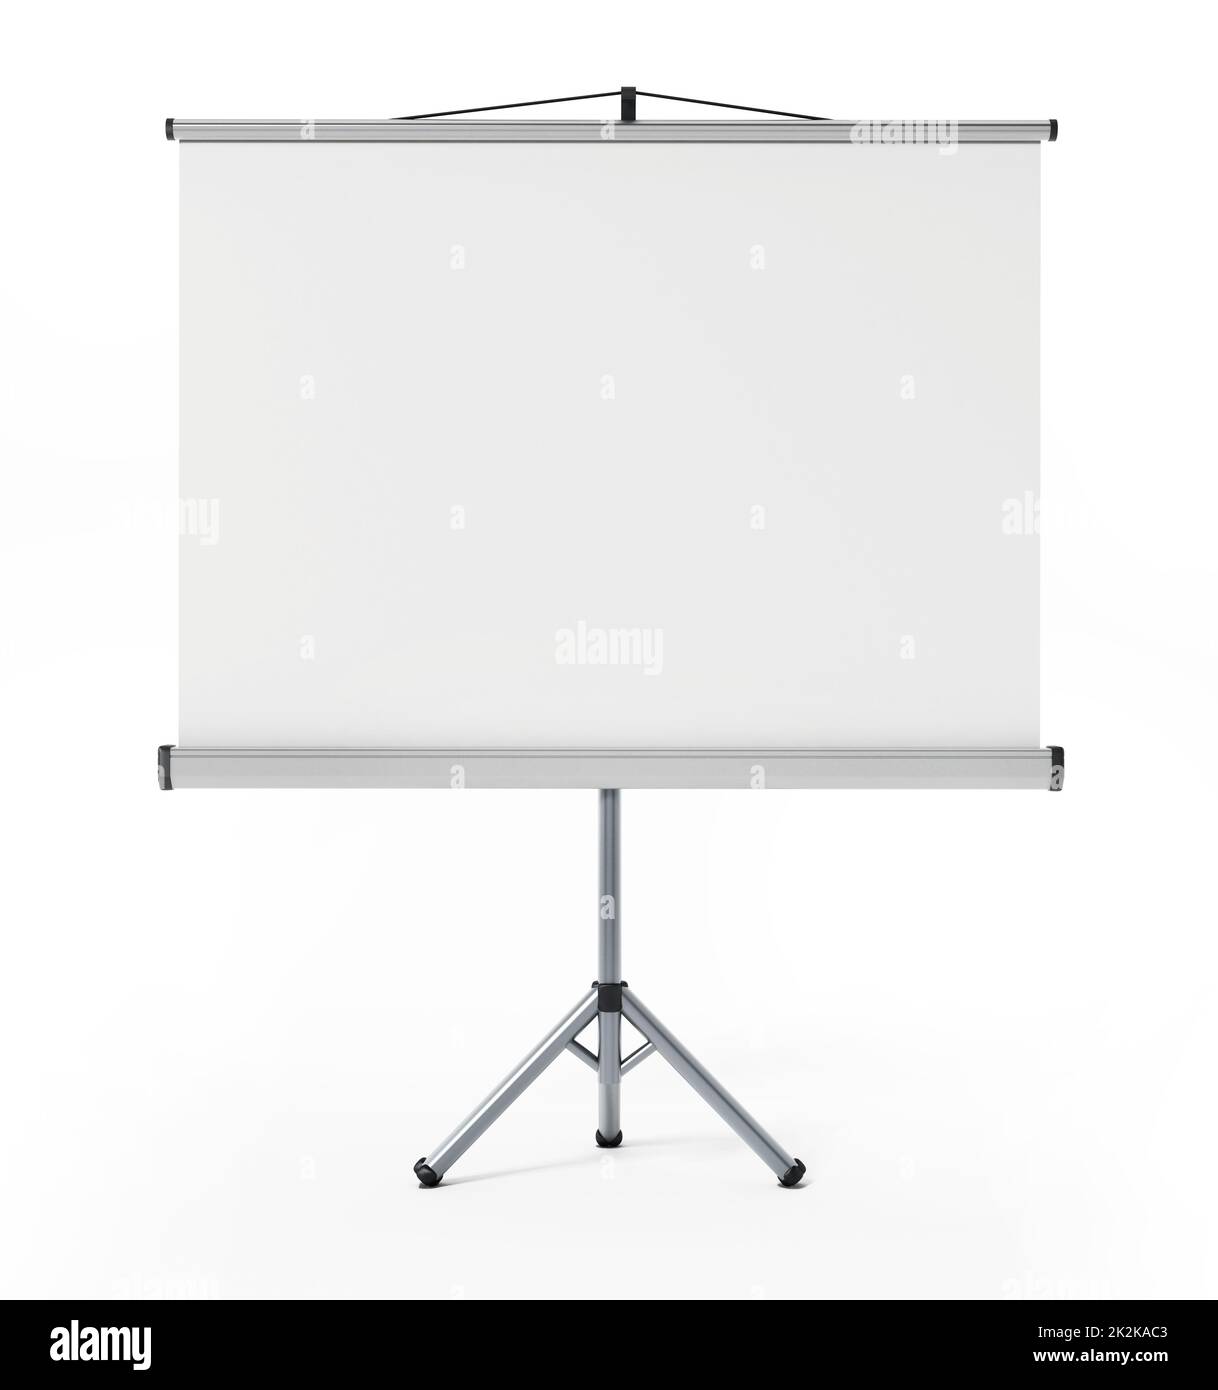 Projection screen isolated on white background. 3D illustration Stock Photo